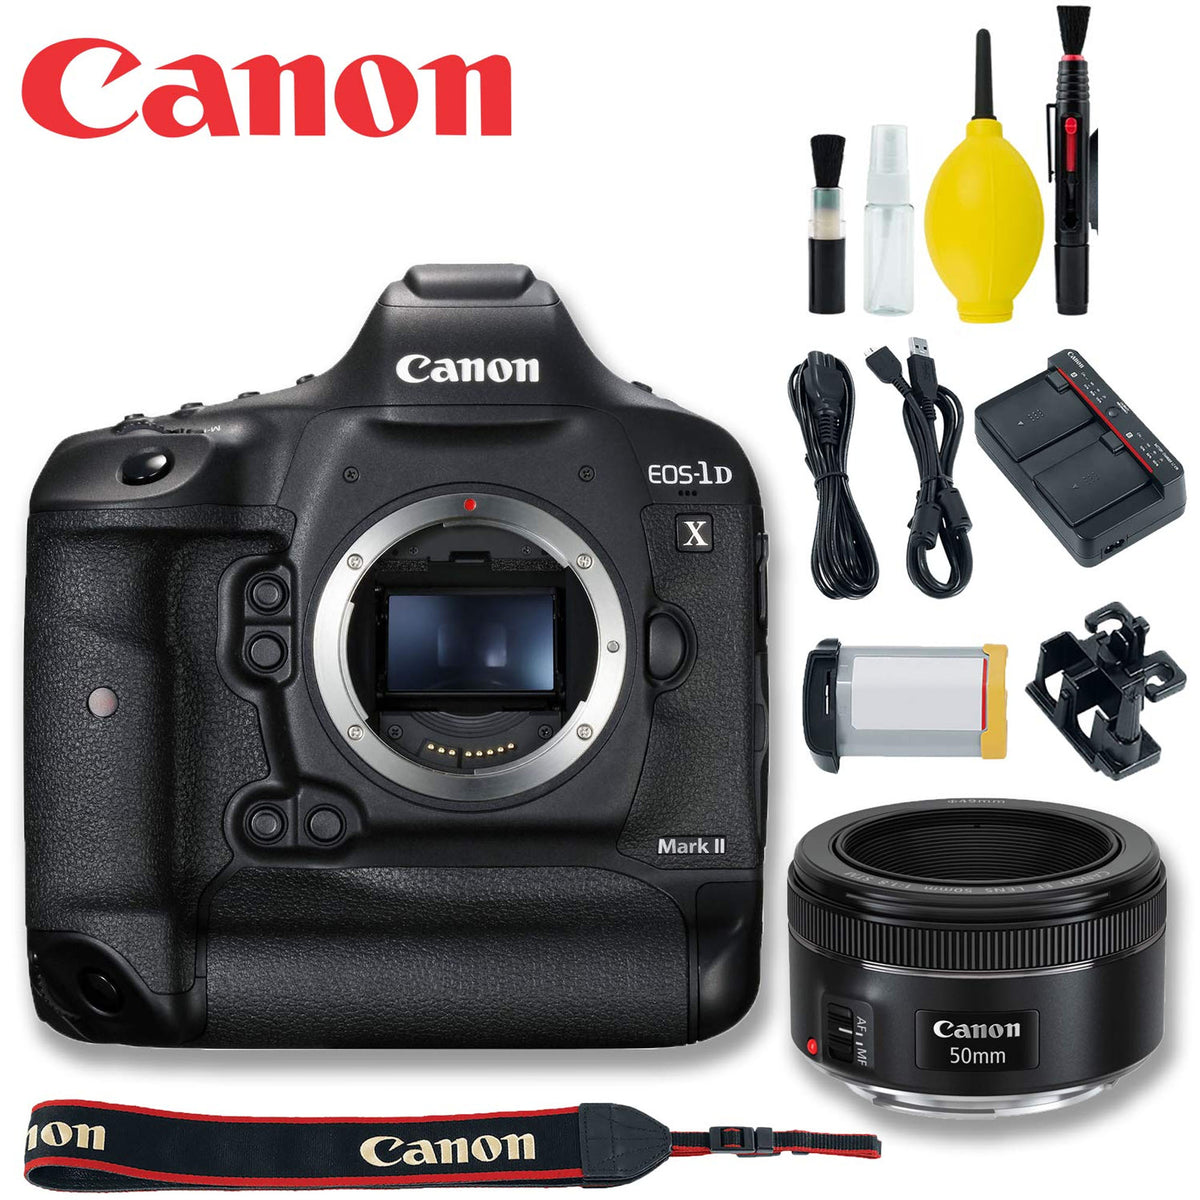 Canon EOS-1D X Mark II DSLR Camera with Canon 50mm 1.8 STM Lens Basic Kit |  NJ Accessory/Buy Direct & Save